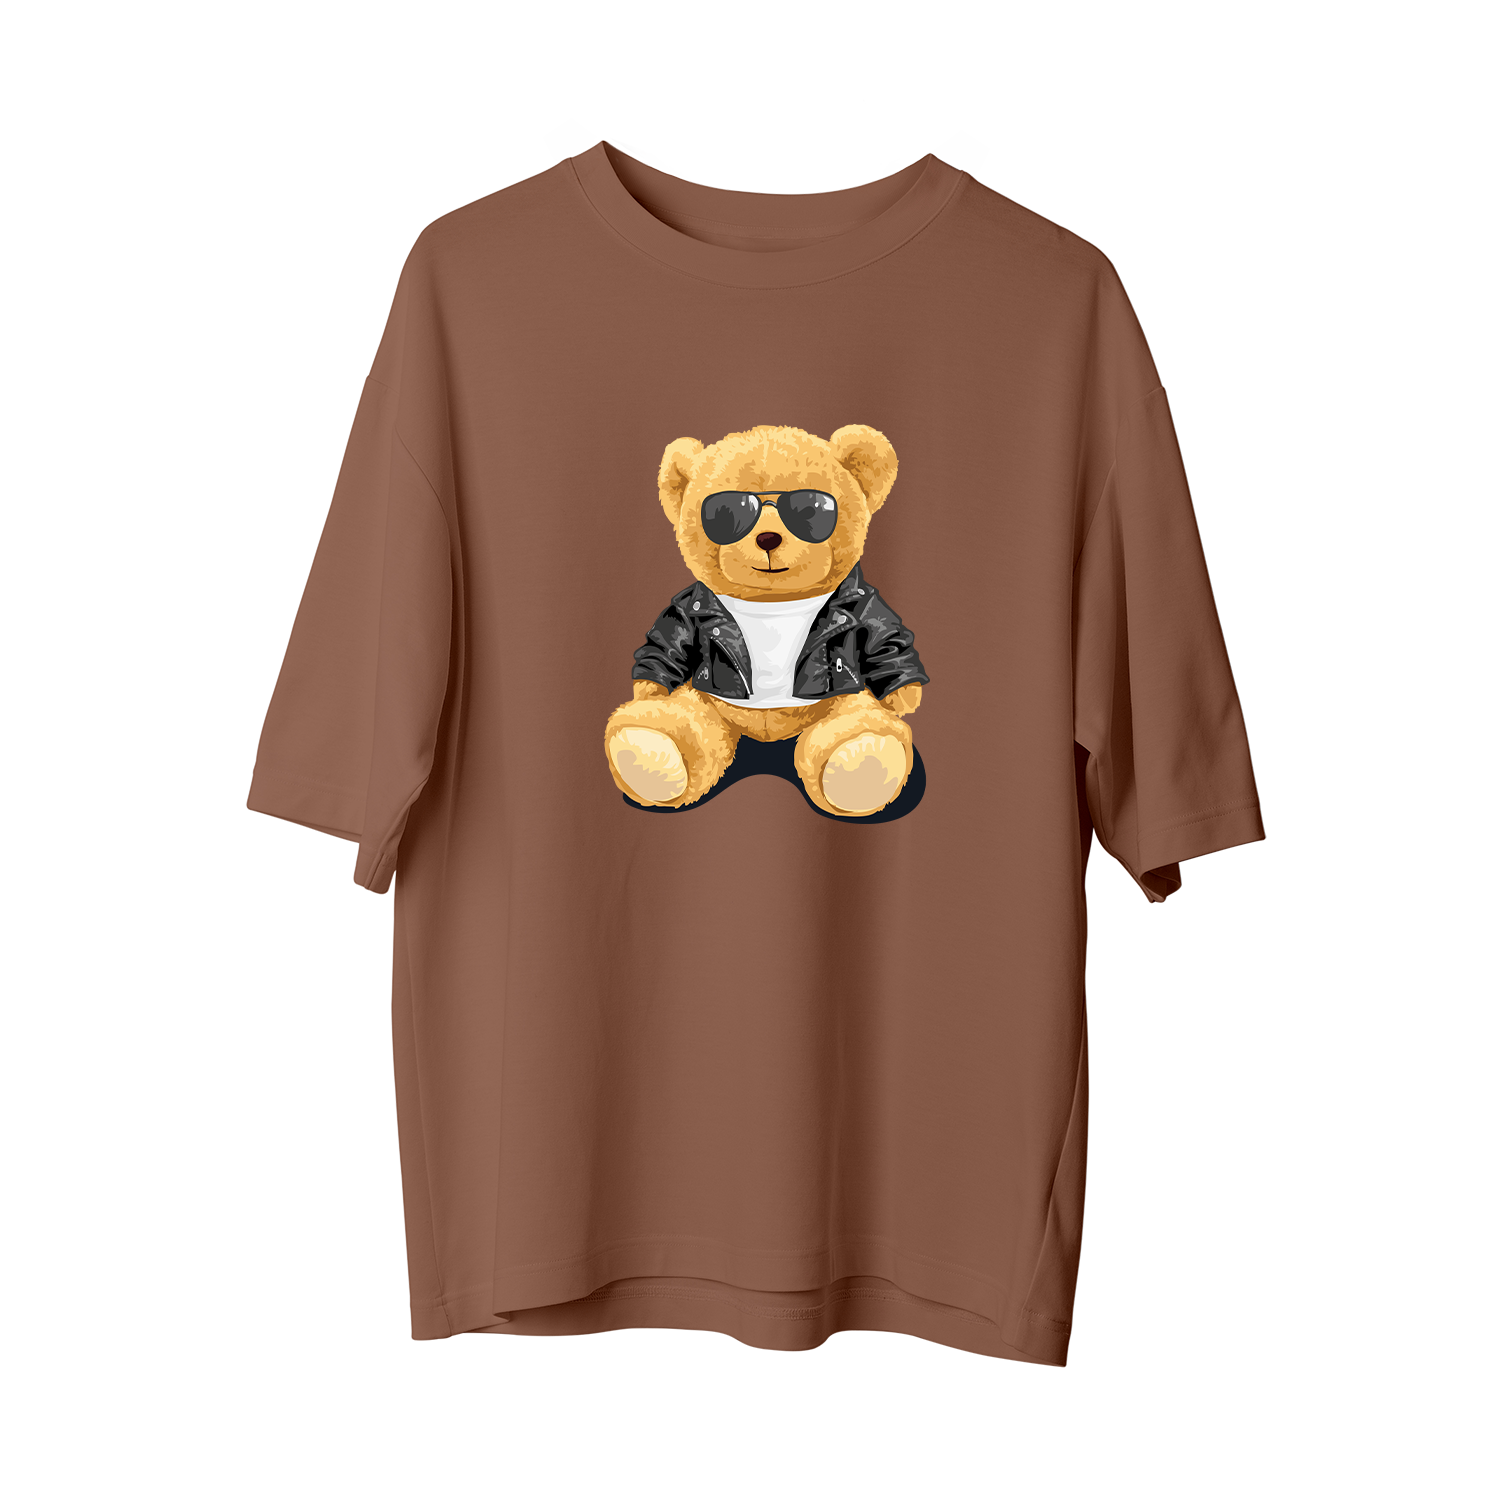 BEAR WITH GLASSES - Oversize T-Shirt